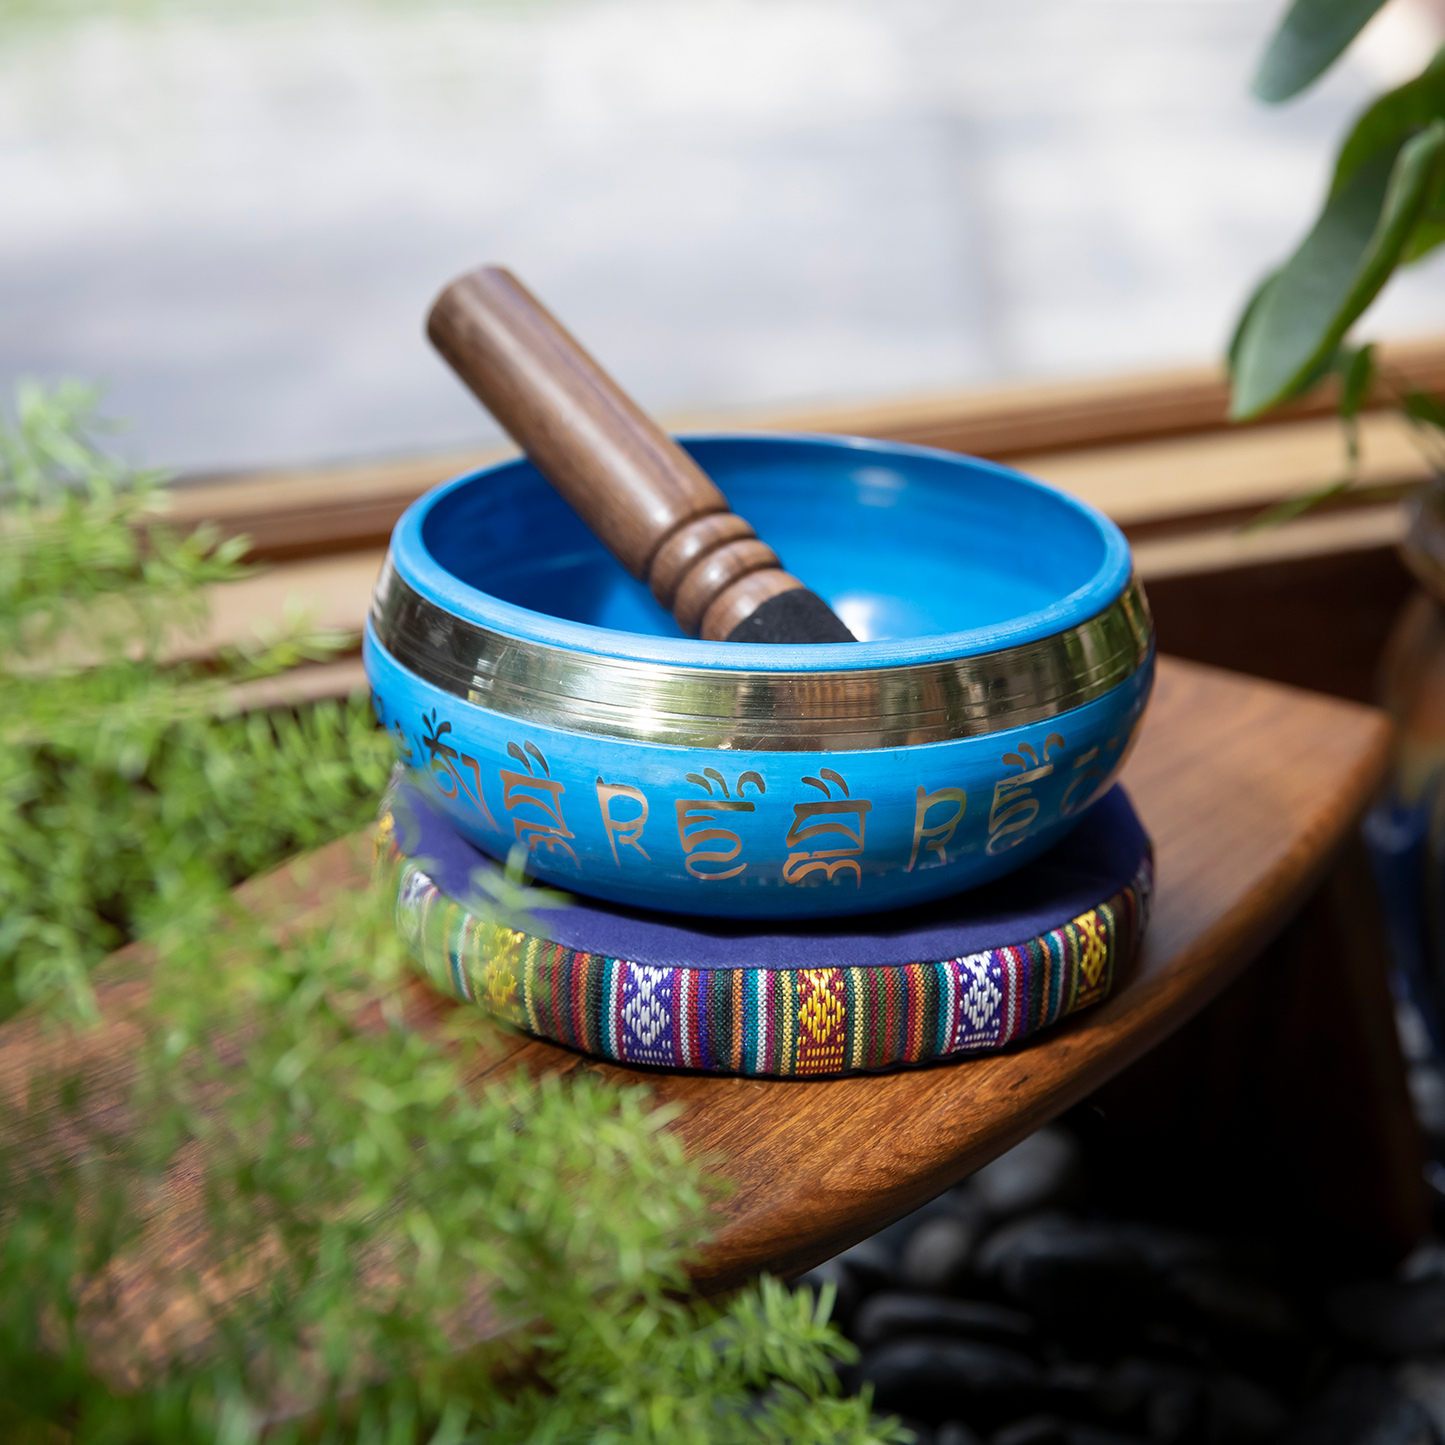 The Medicine Buddha Singing Bowl rests atop a cushion and wooden meditation stool, mallet inside, while plants frame the subject.